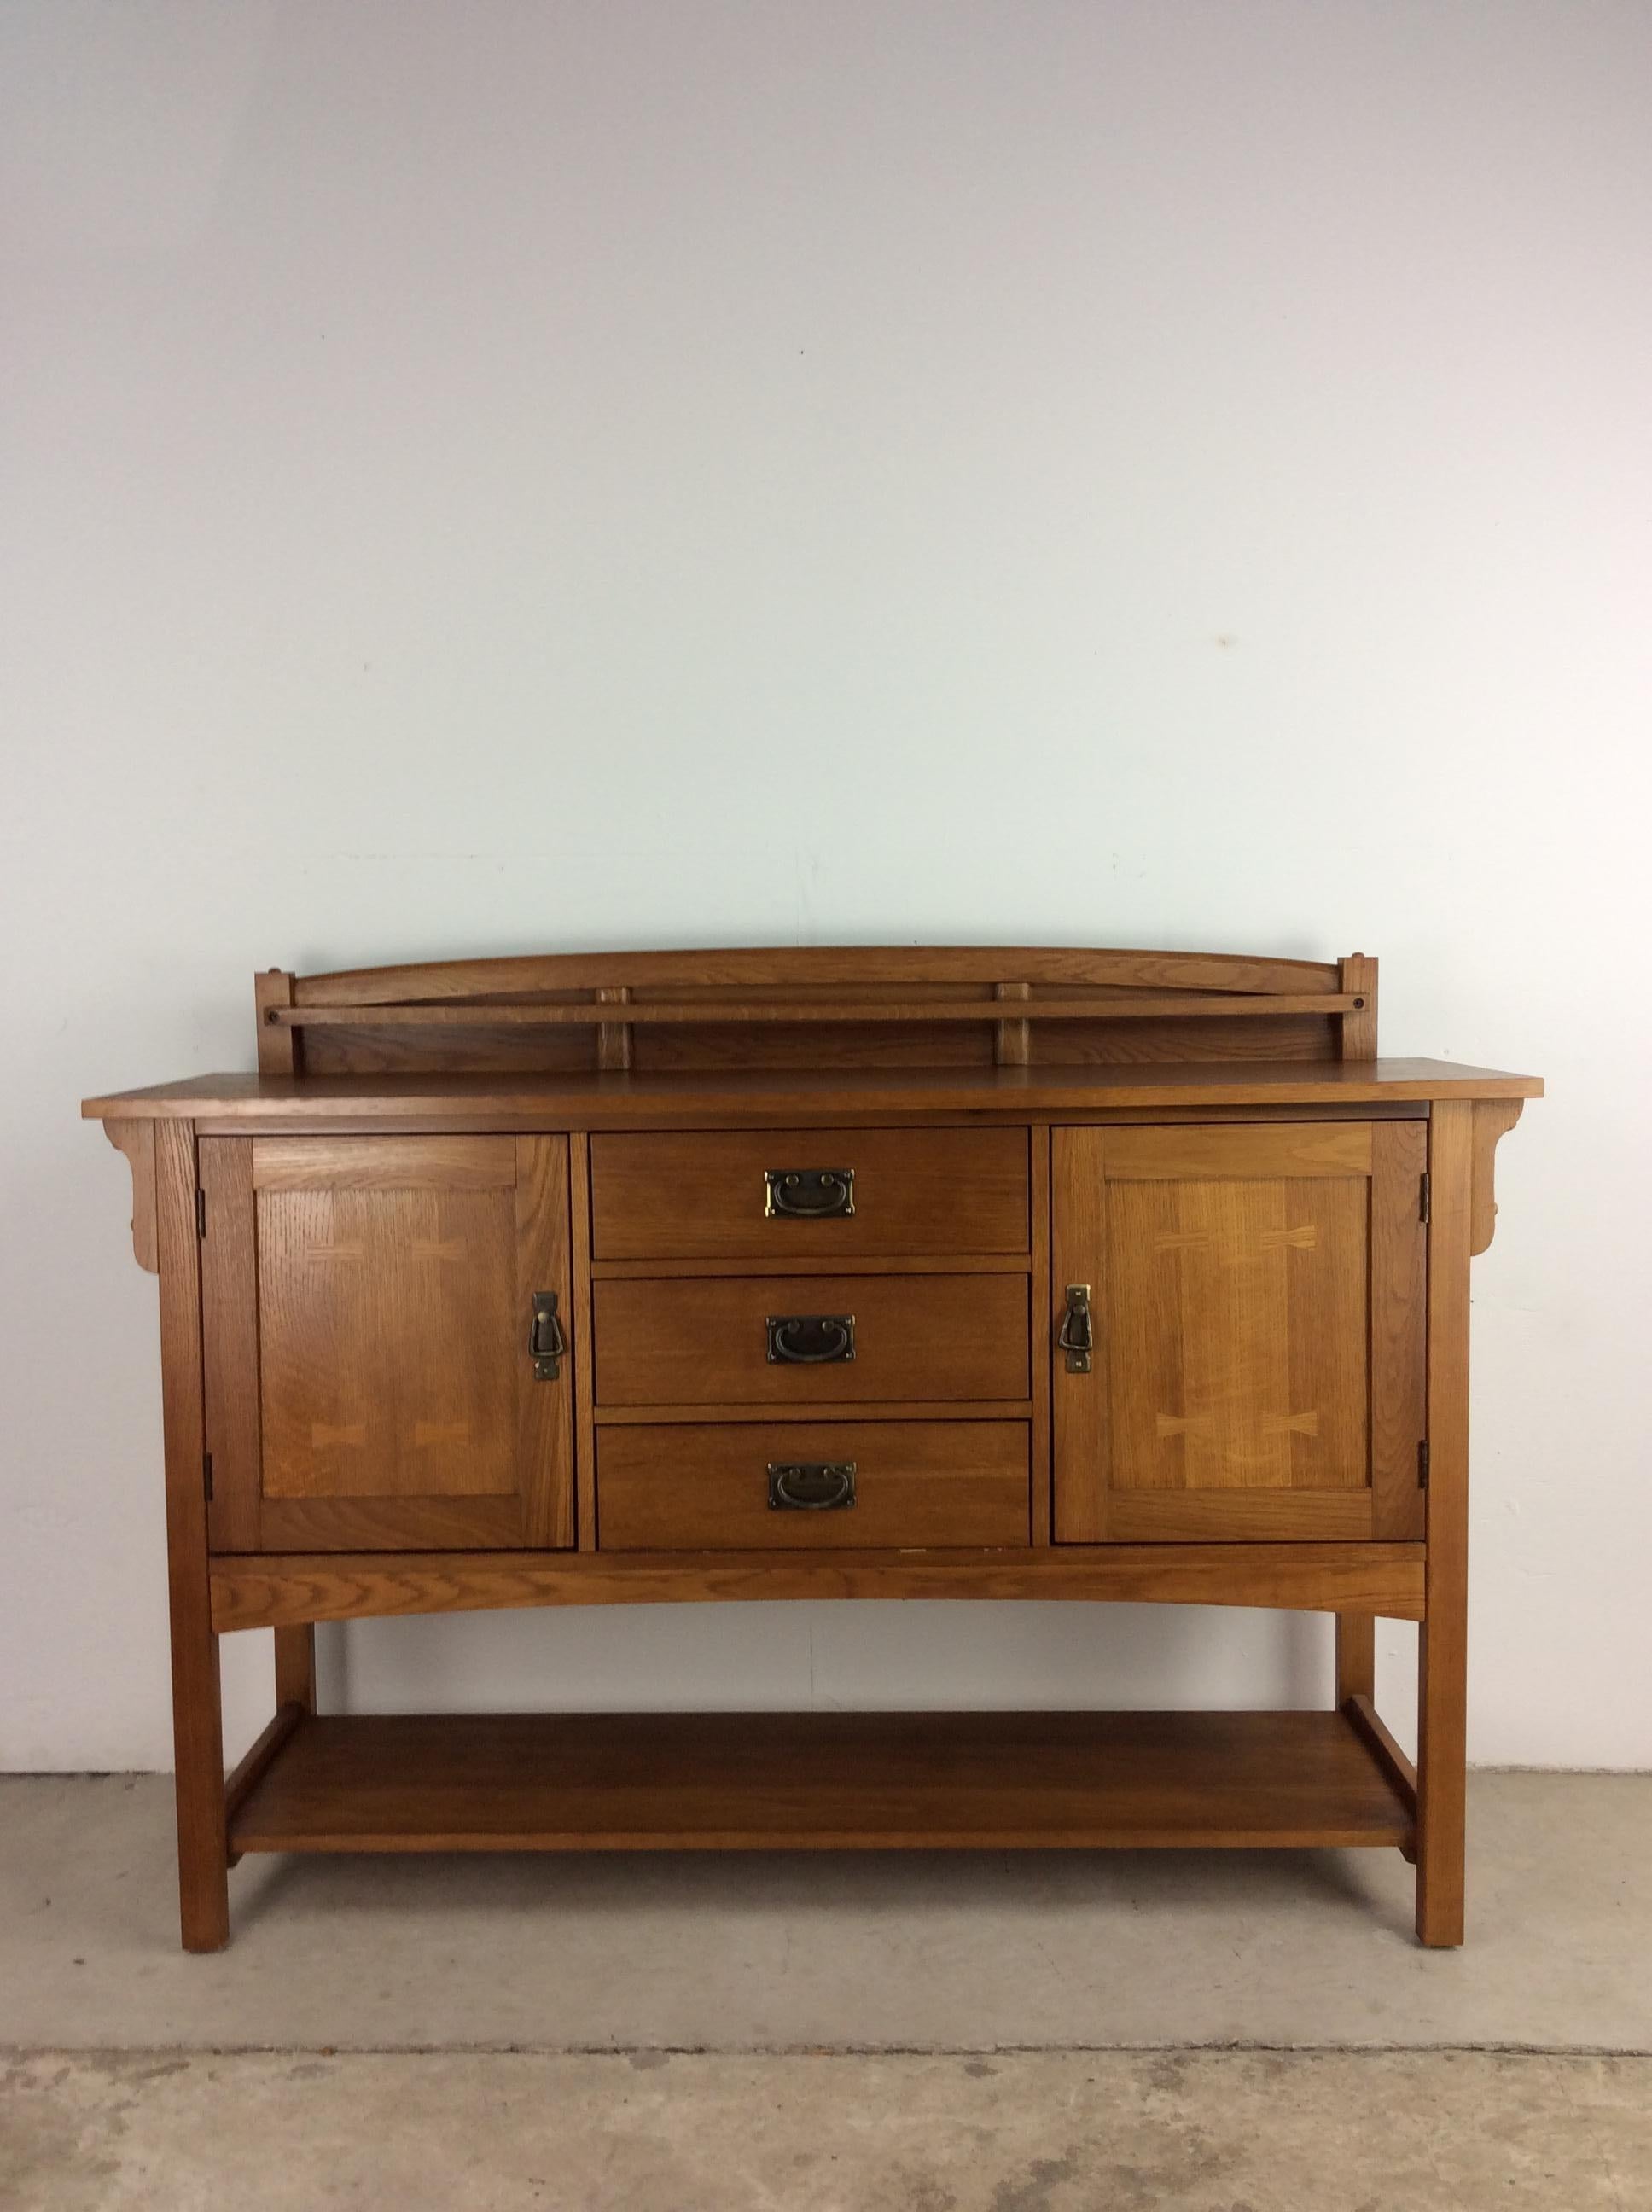 This vintage sideboard by Bassett Furniture features hardwood construction, original oak finish, unique dovetail detail on the cabinet door faces, brass accented hardware and open shelving along the base. 

This piece is identical to one that can